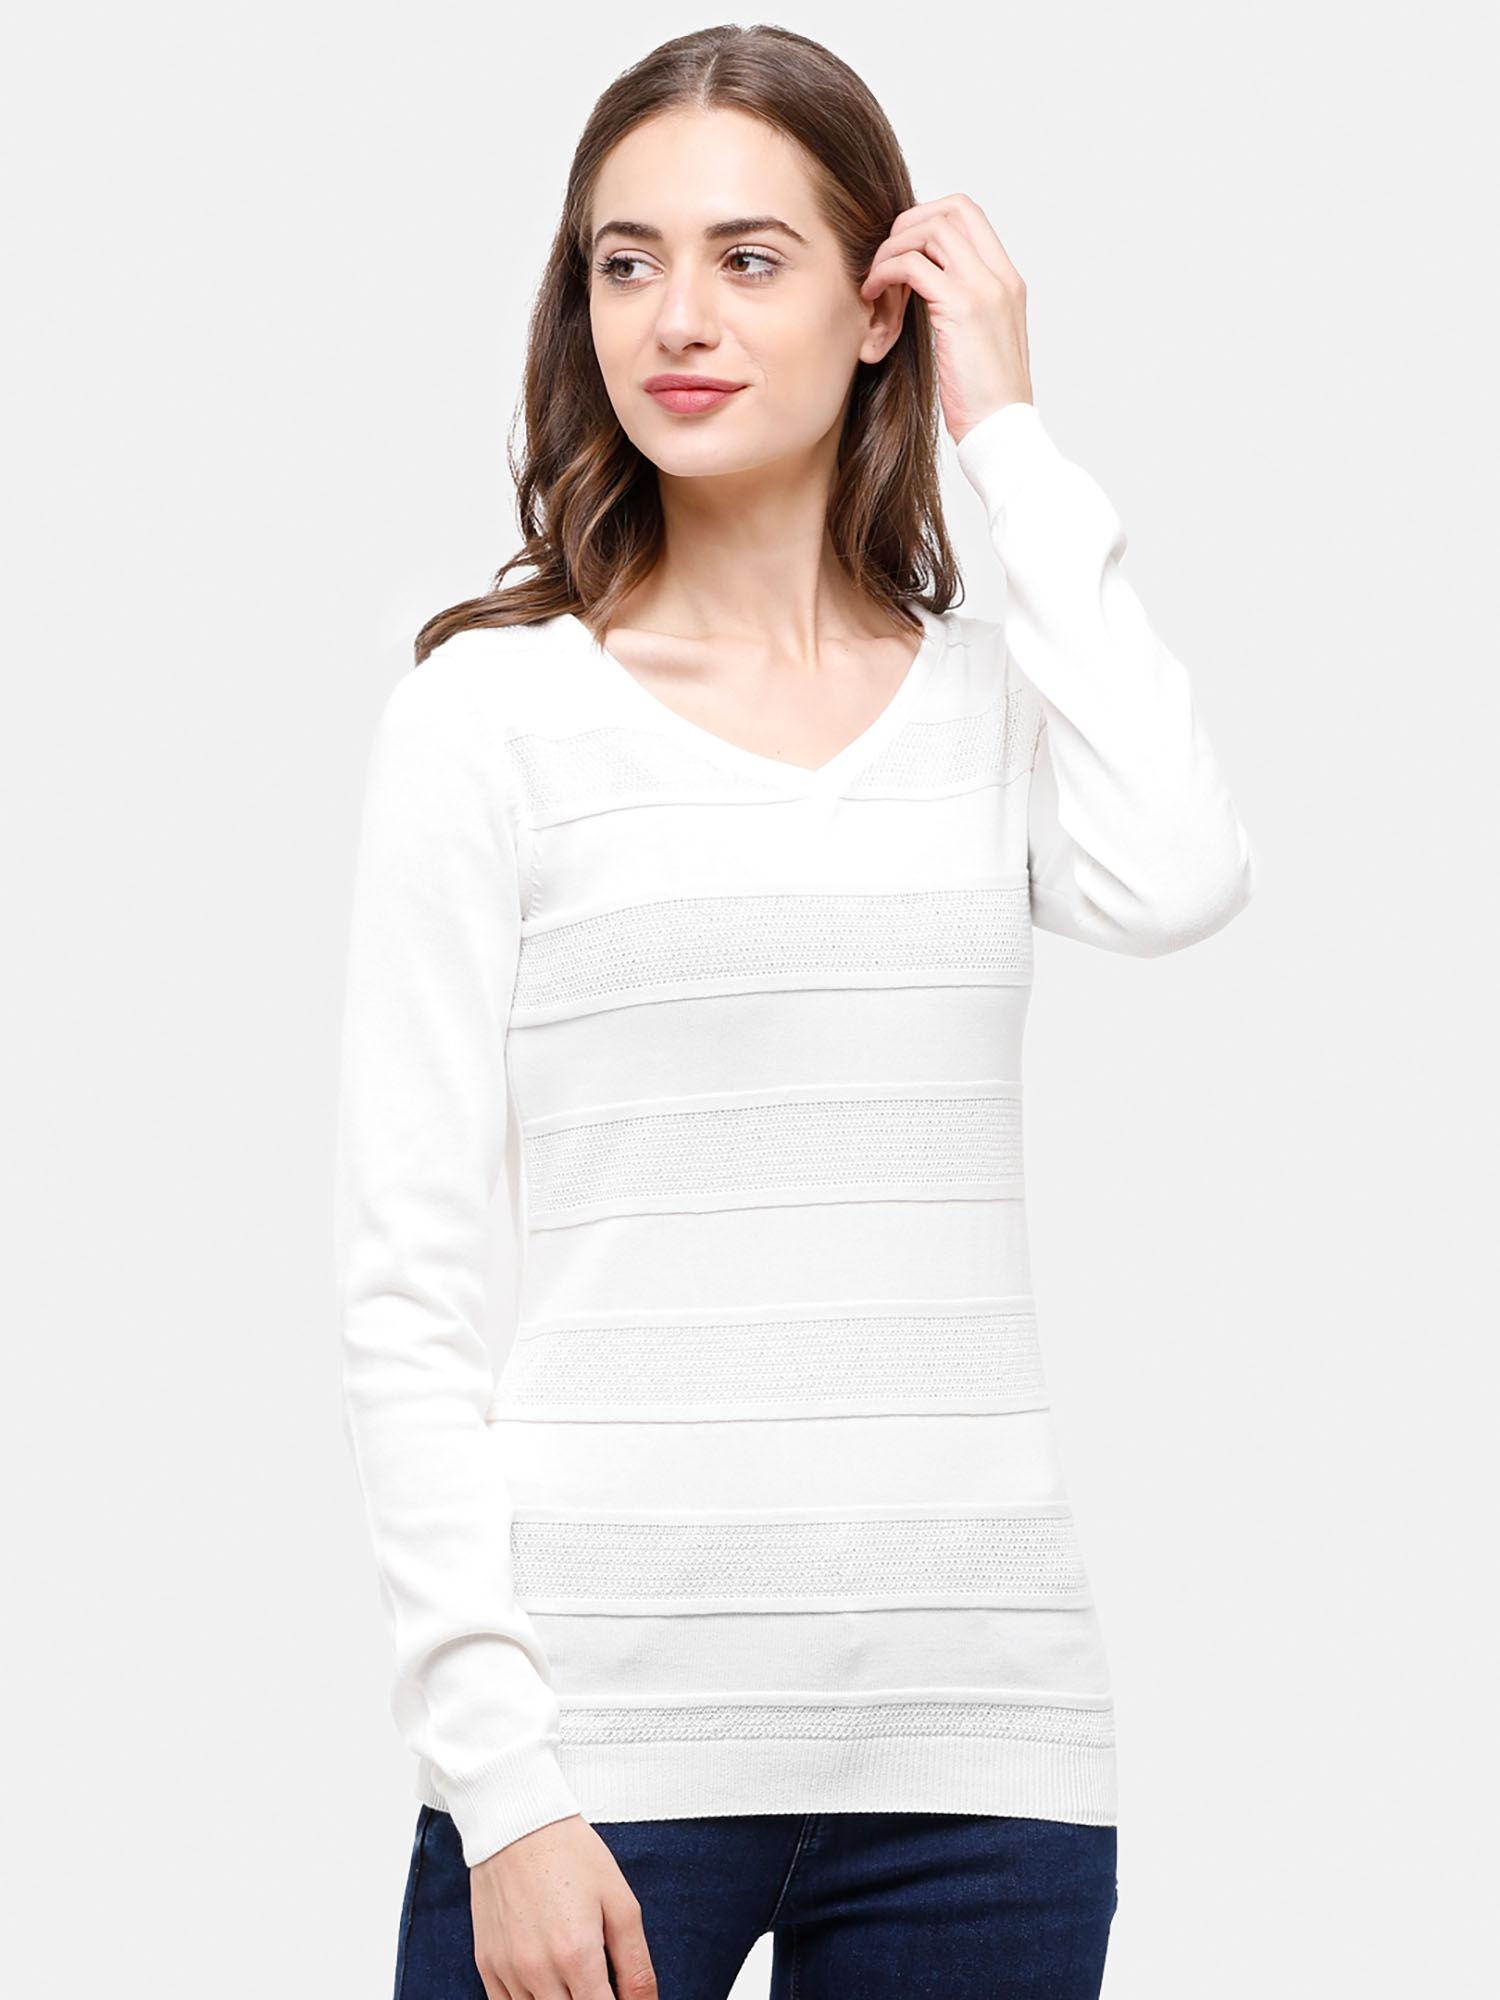 98 degree north's white full sleeves sweater